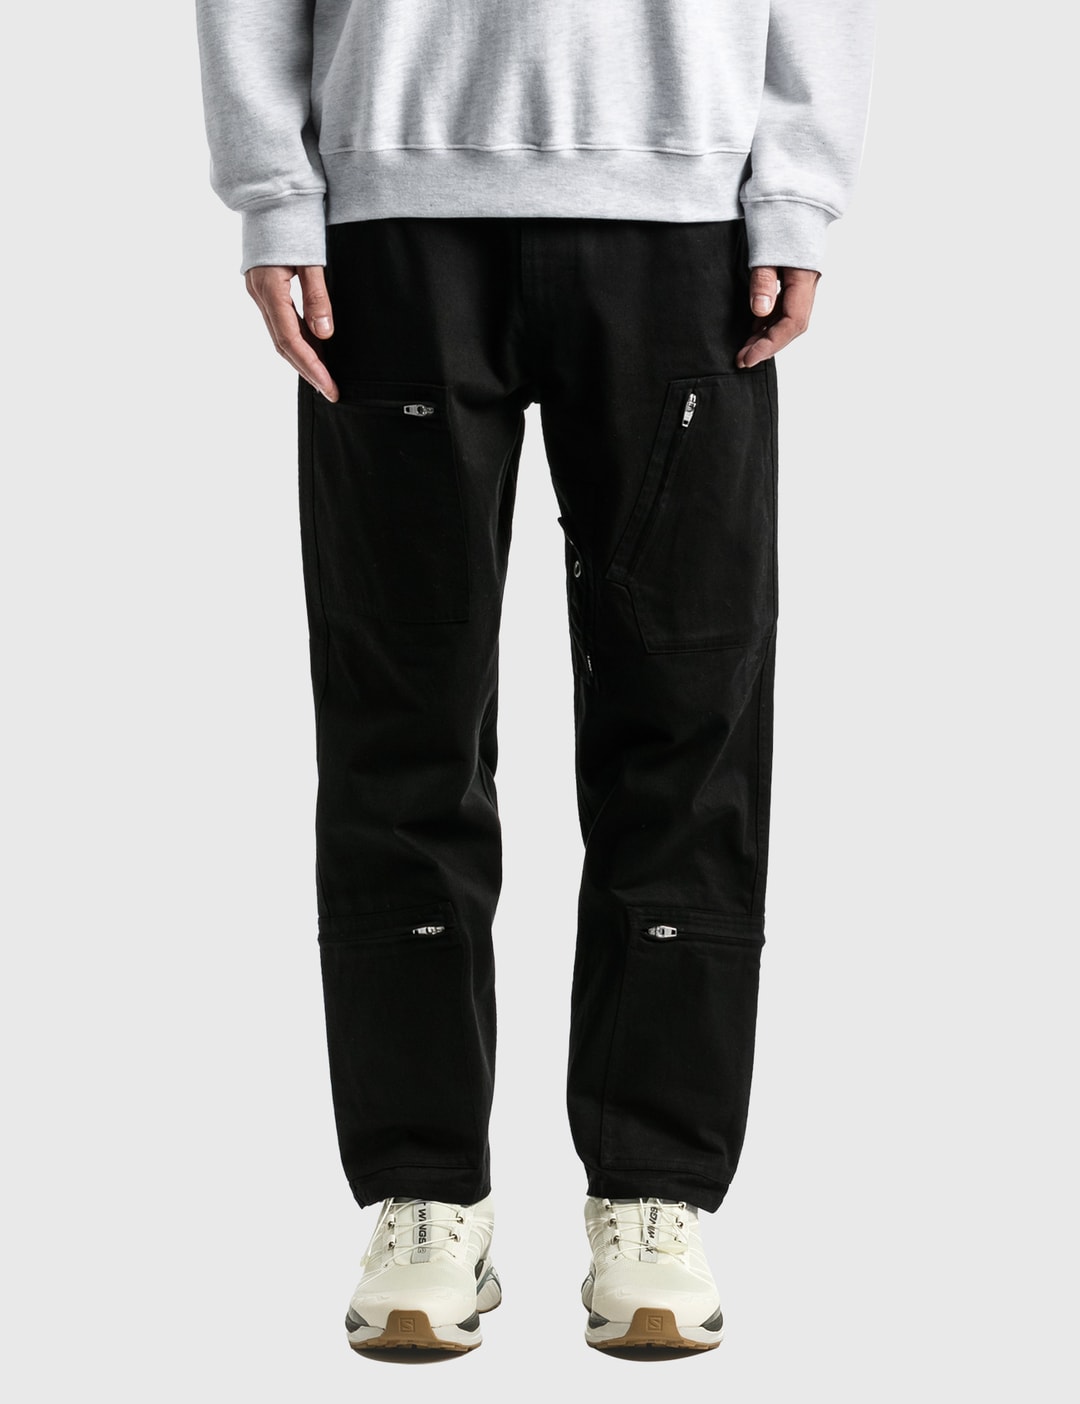 LMC - BDG Flight Pants | HBX - Globally Curated Fashion and Lifestyle ...